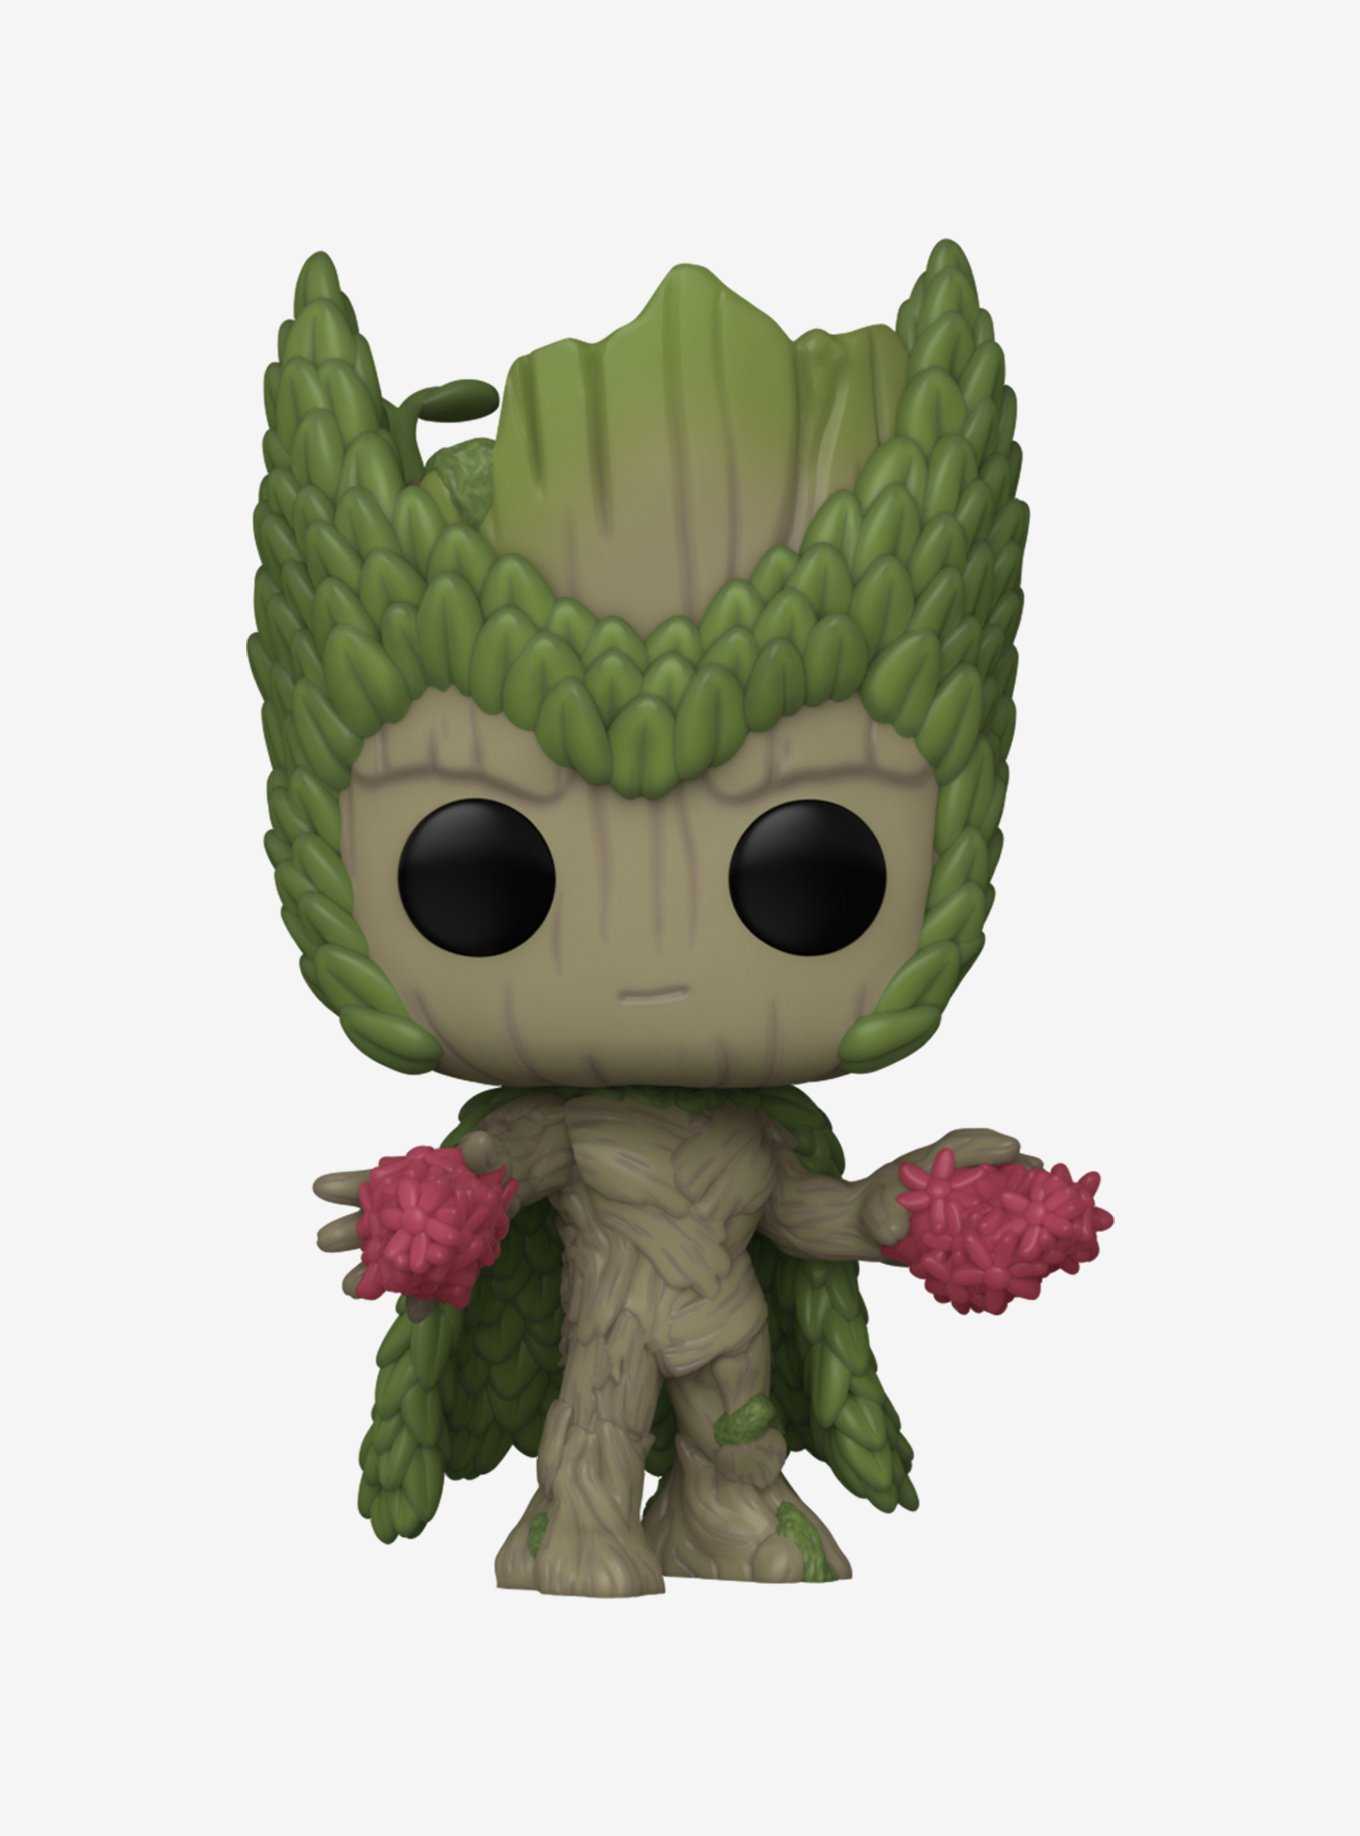 Funko Pop! Marvel 85th Anniversary We Are Groot Groot as Scarlet Witch Vinyl Bobblehead Figure, , hi-res